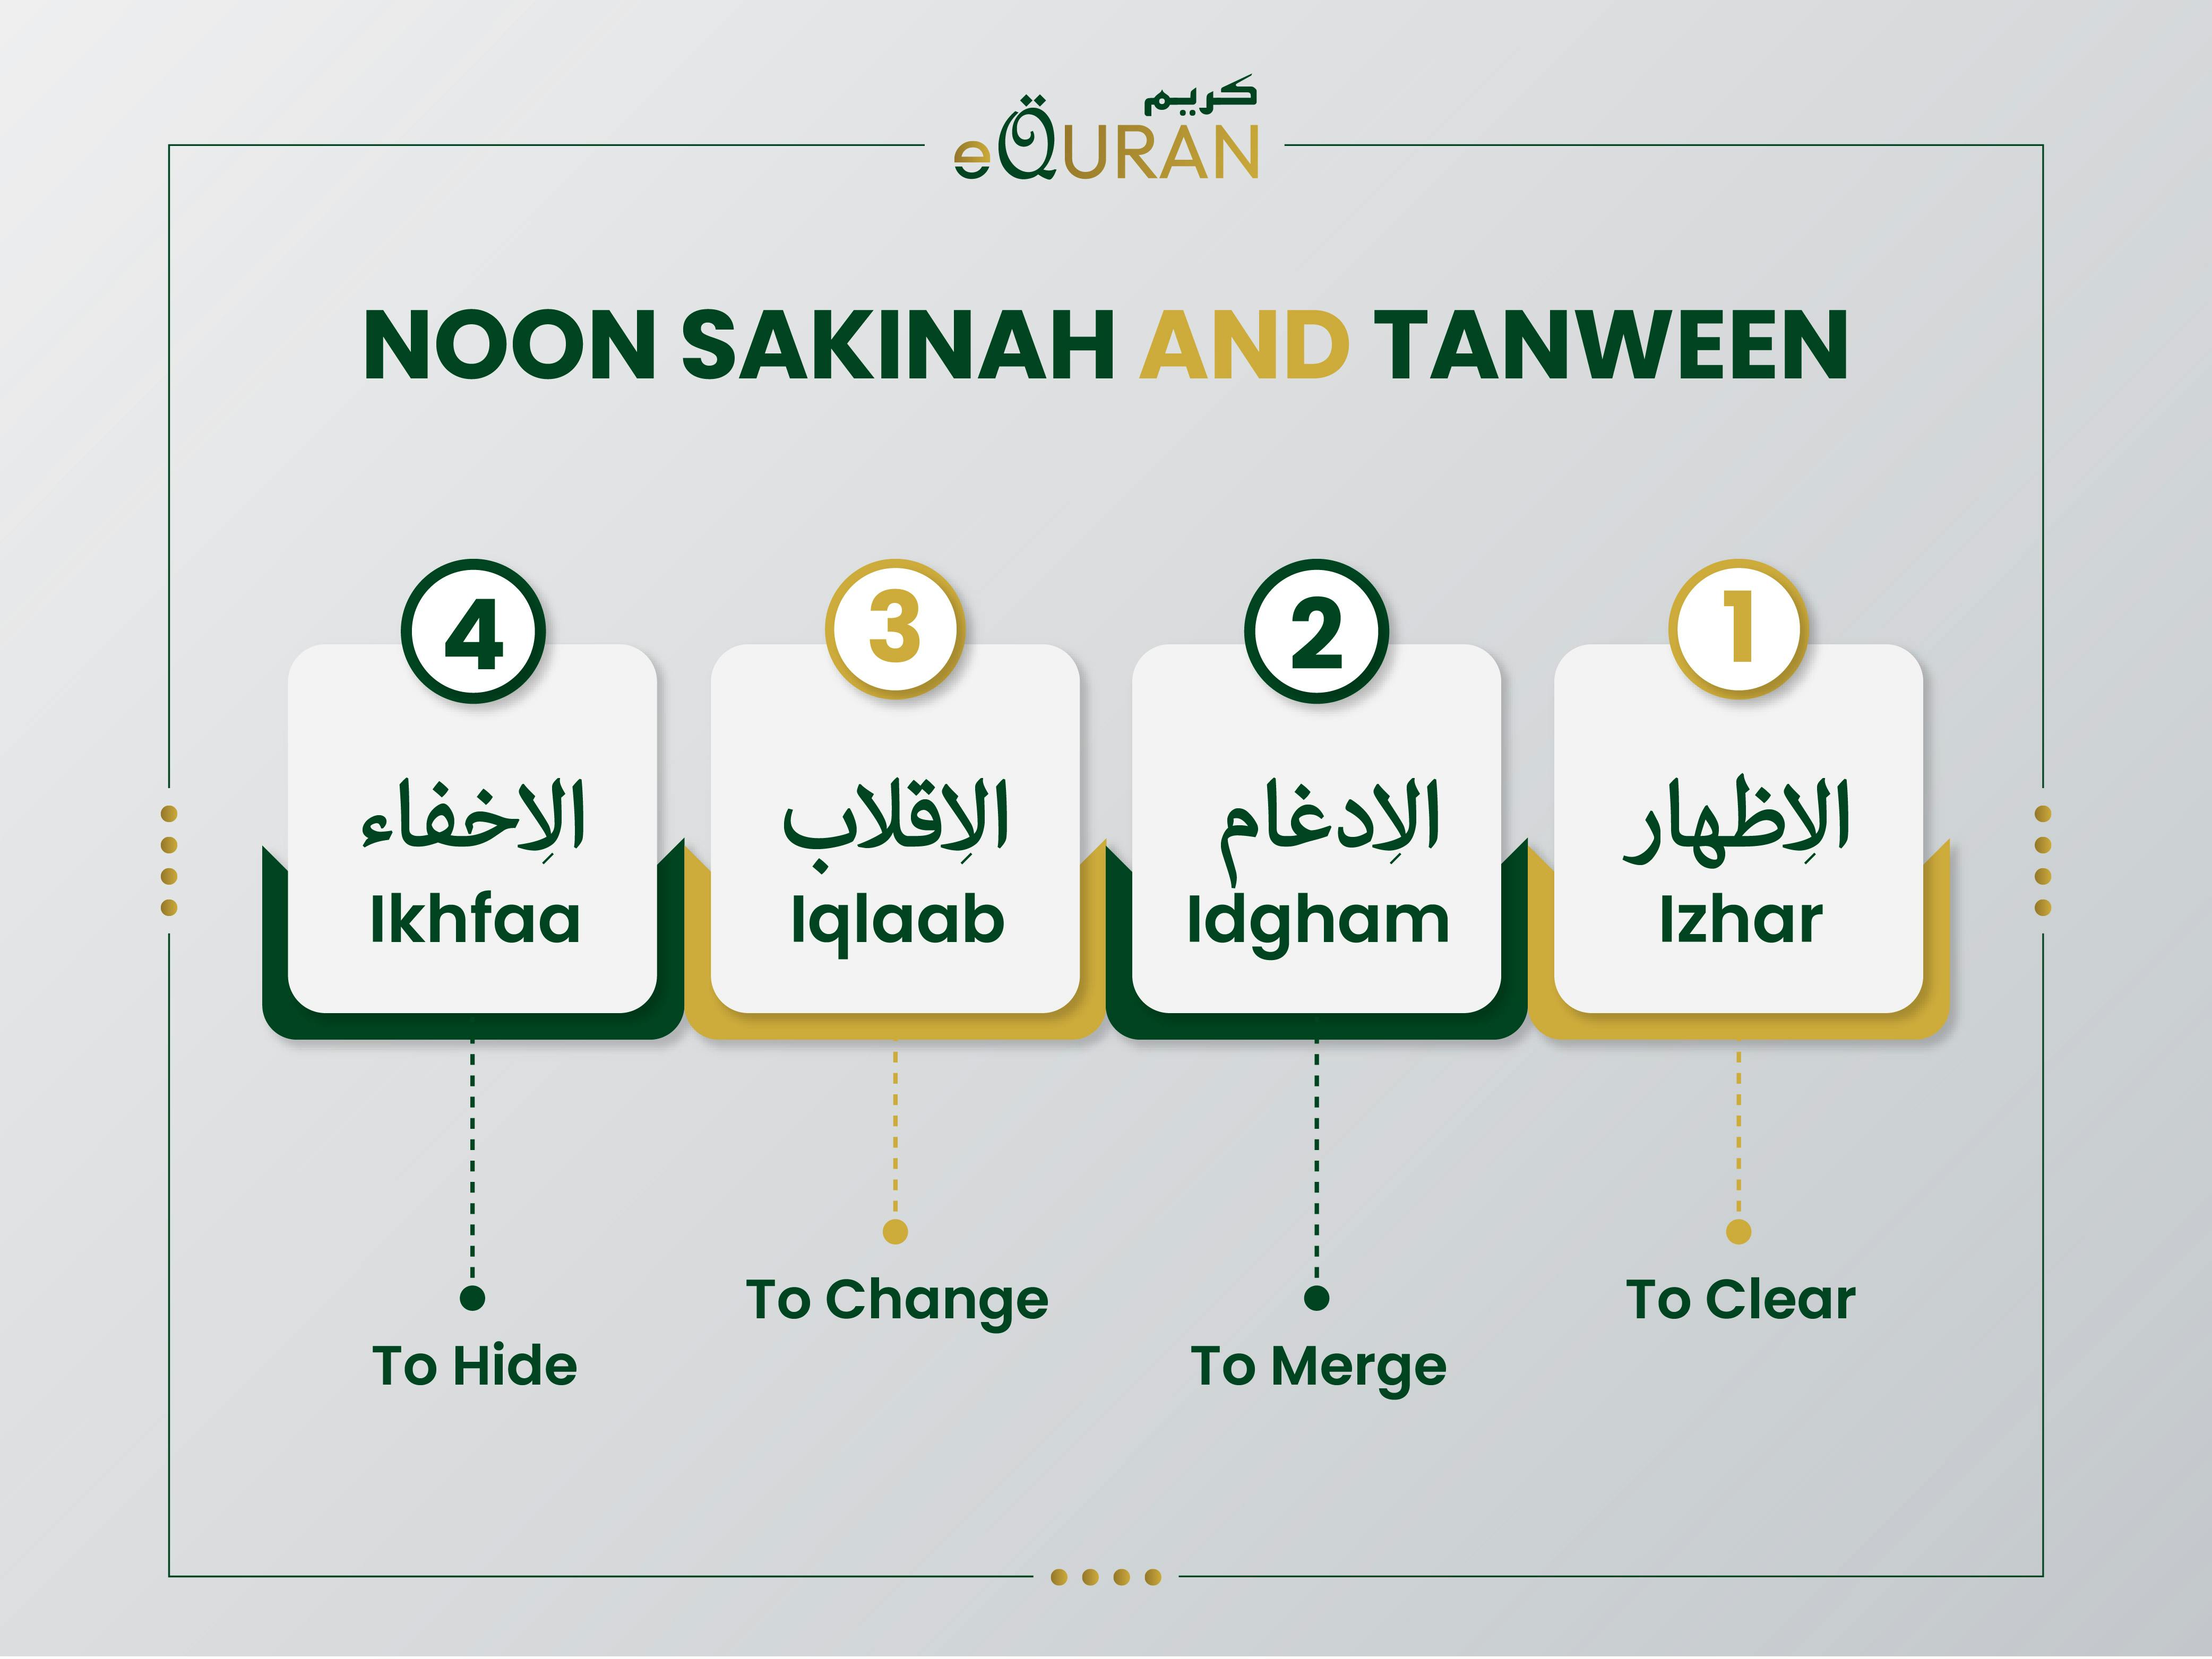 Noon sakinah and Tanween and Noon sakinah rules for Izhar letters, Iqlab letters and Idgham letters